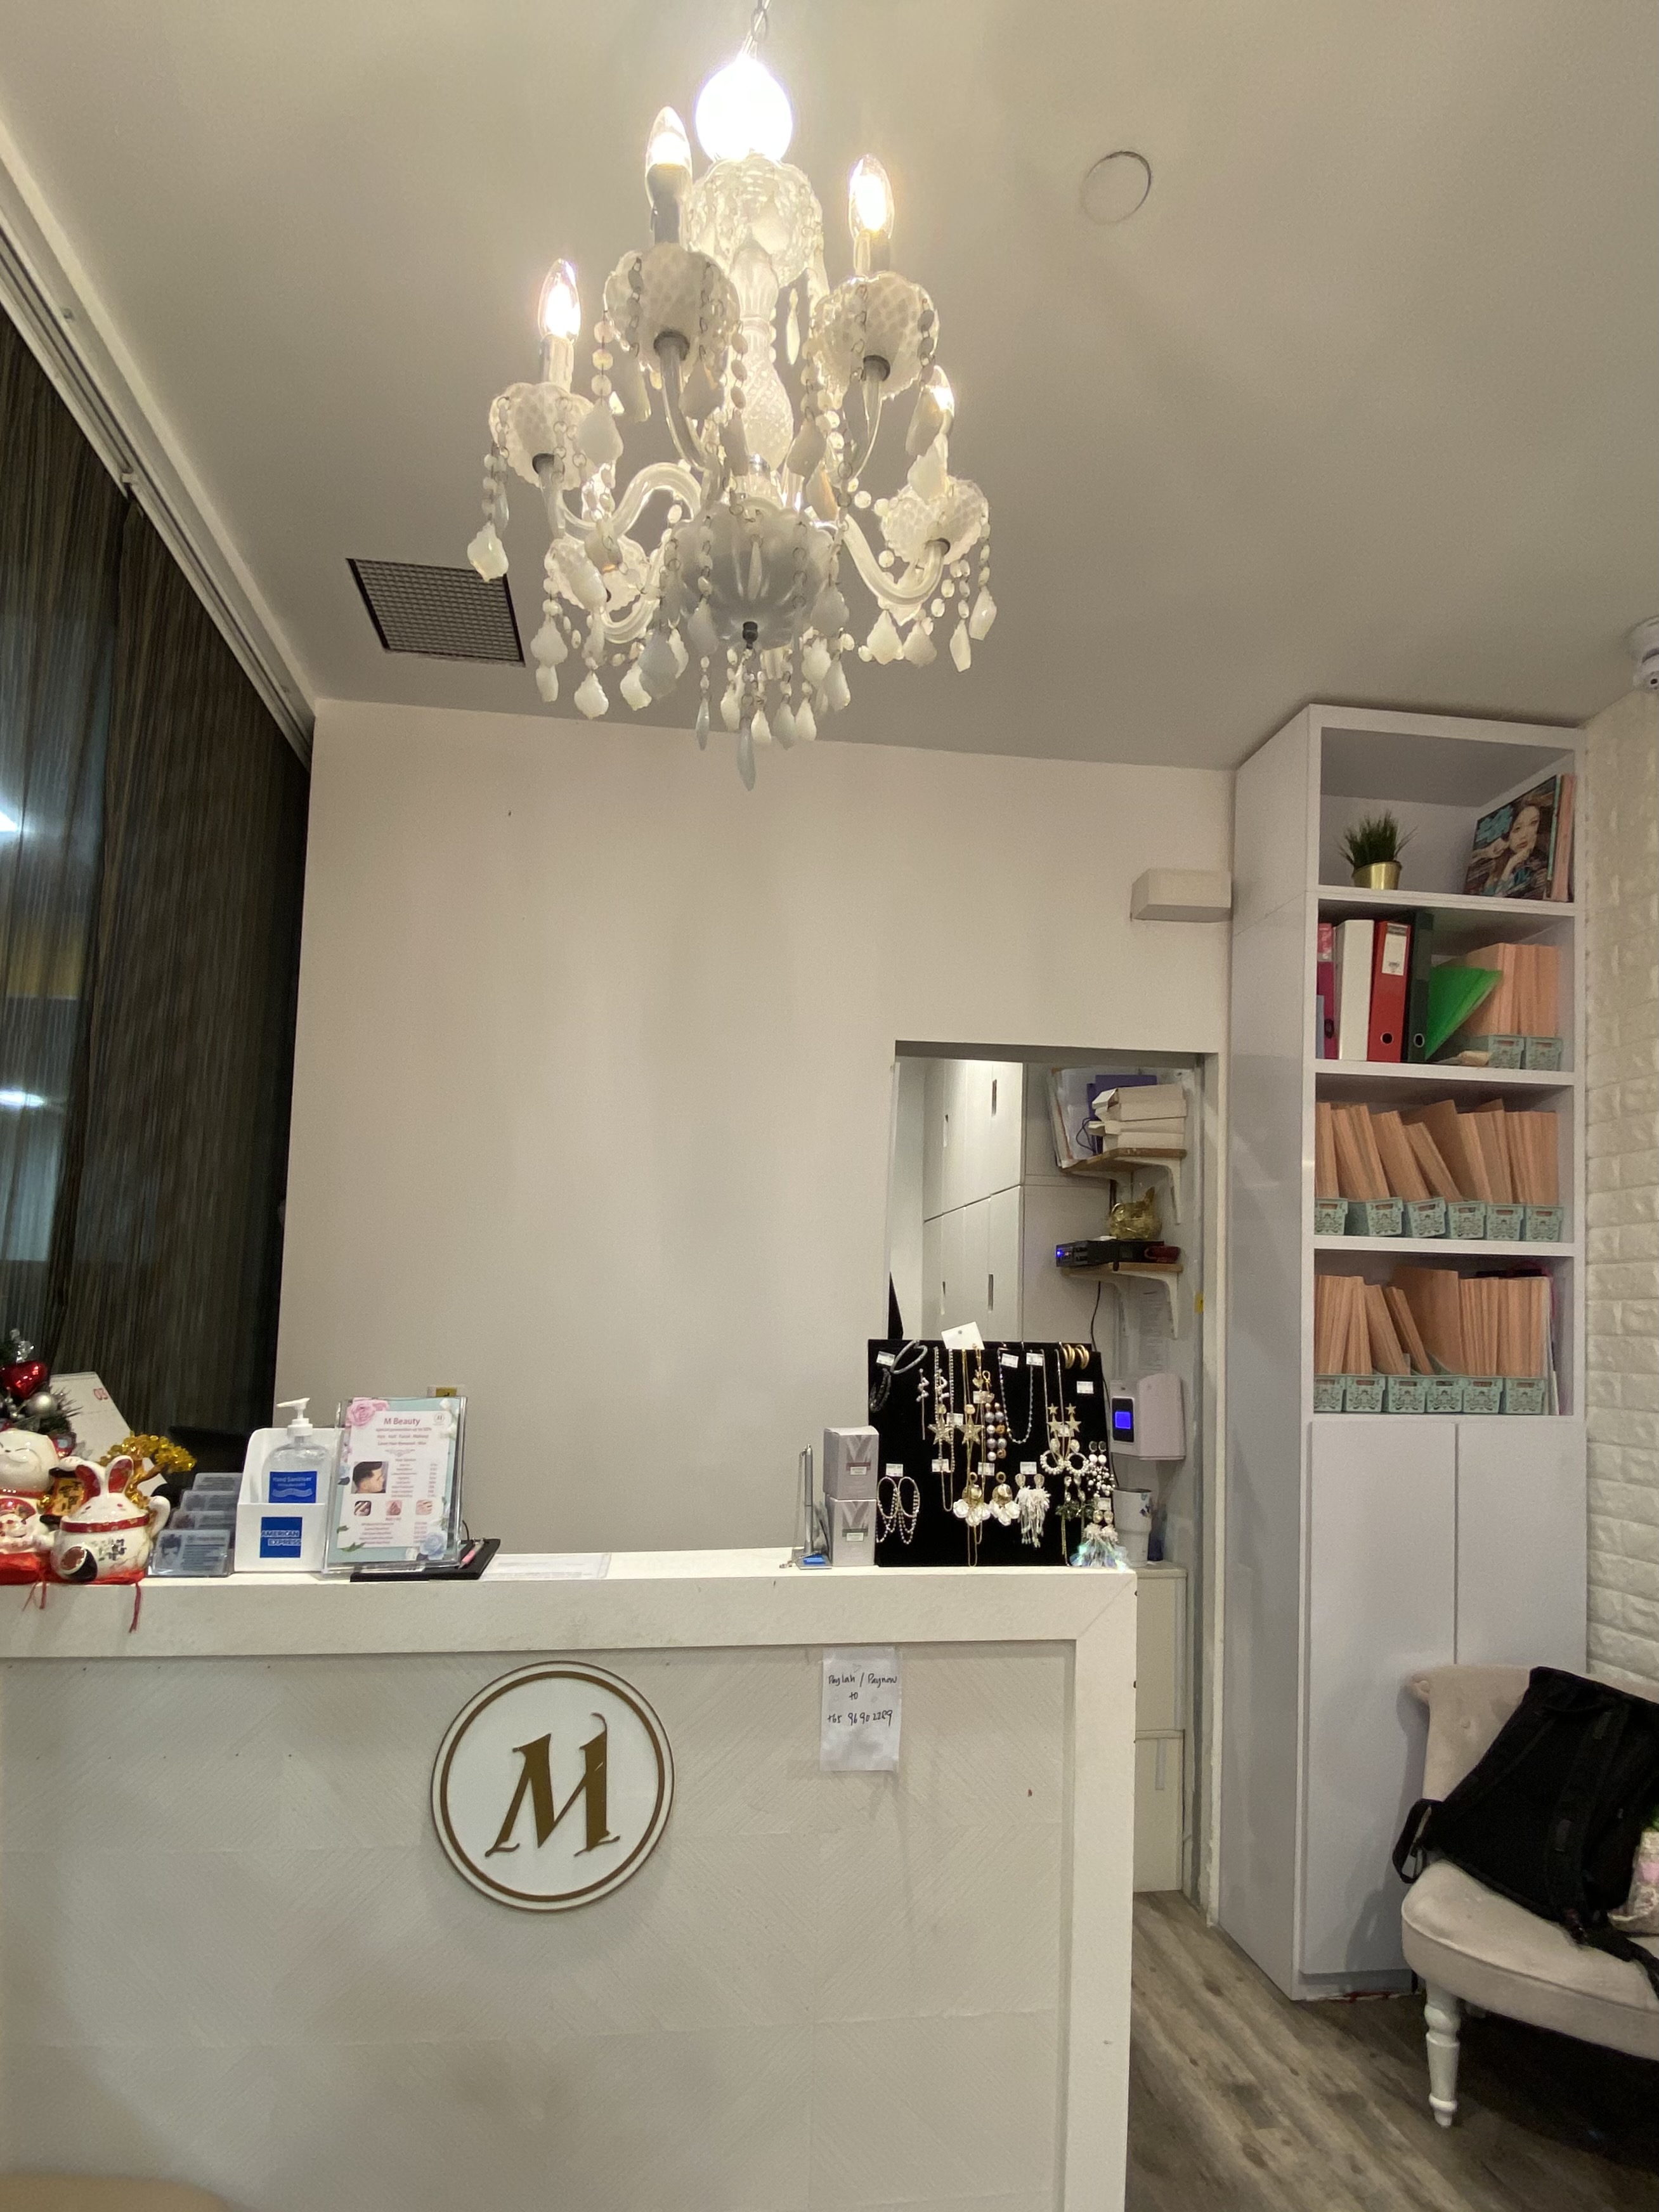 M Beauty (The Central) - Dine, Shop, Earn